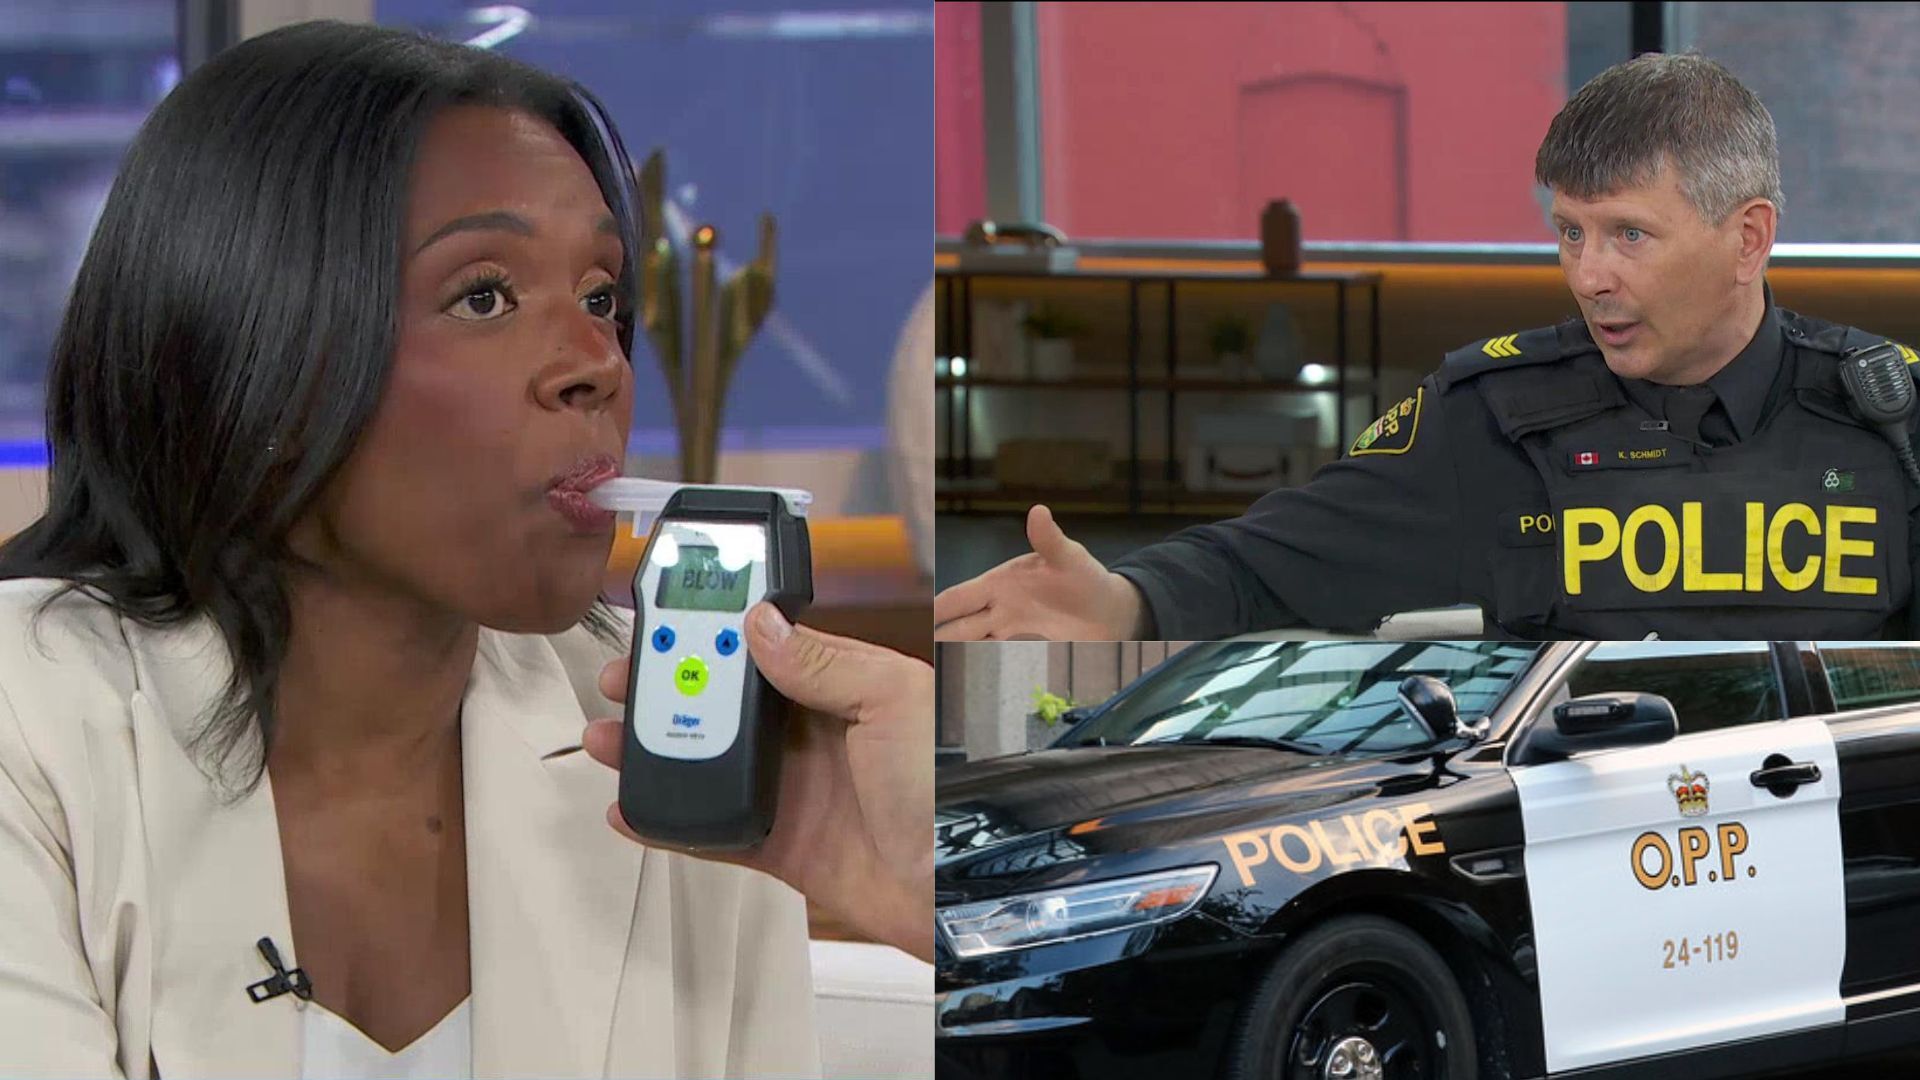 You'll now be required to do a breathalyzer test if you get pulled over in the GTA